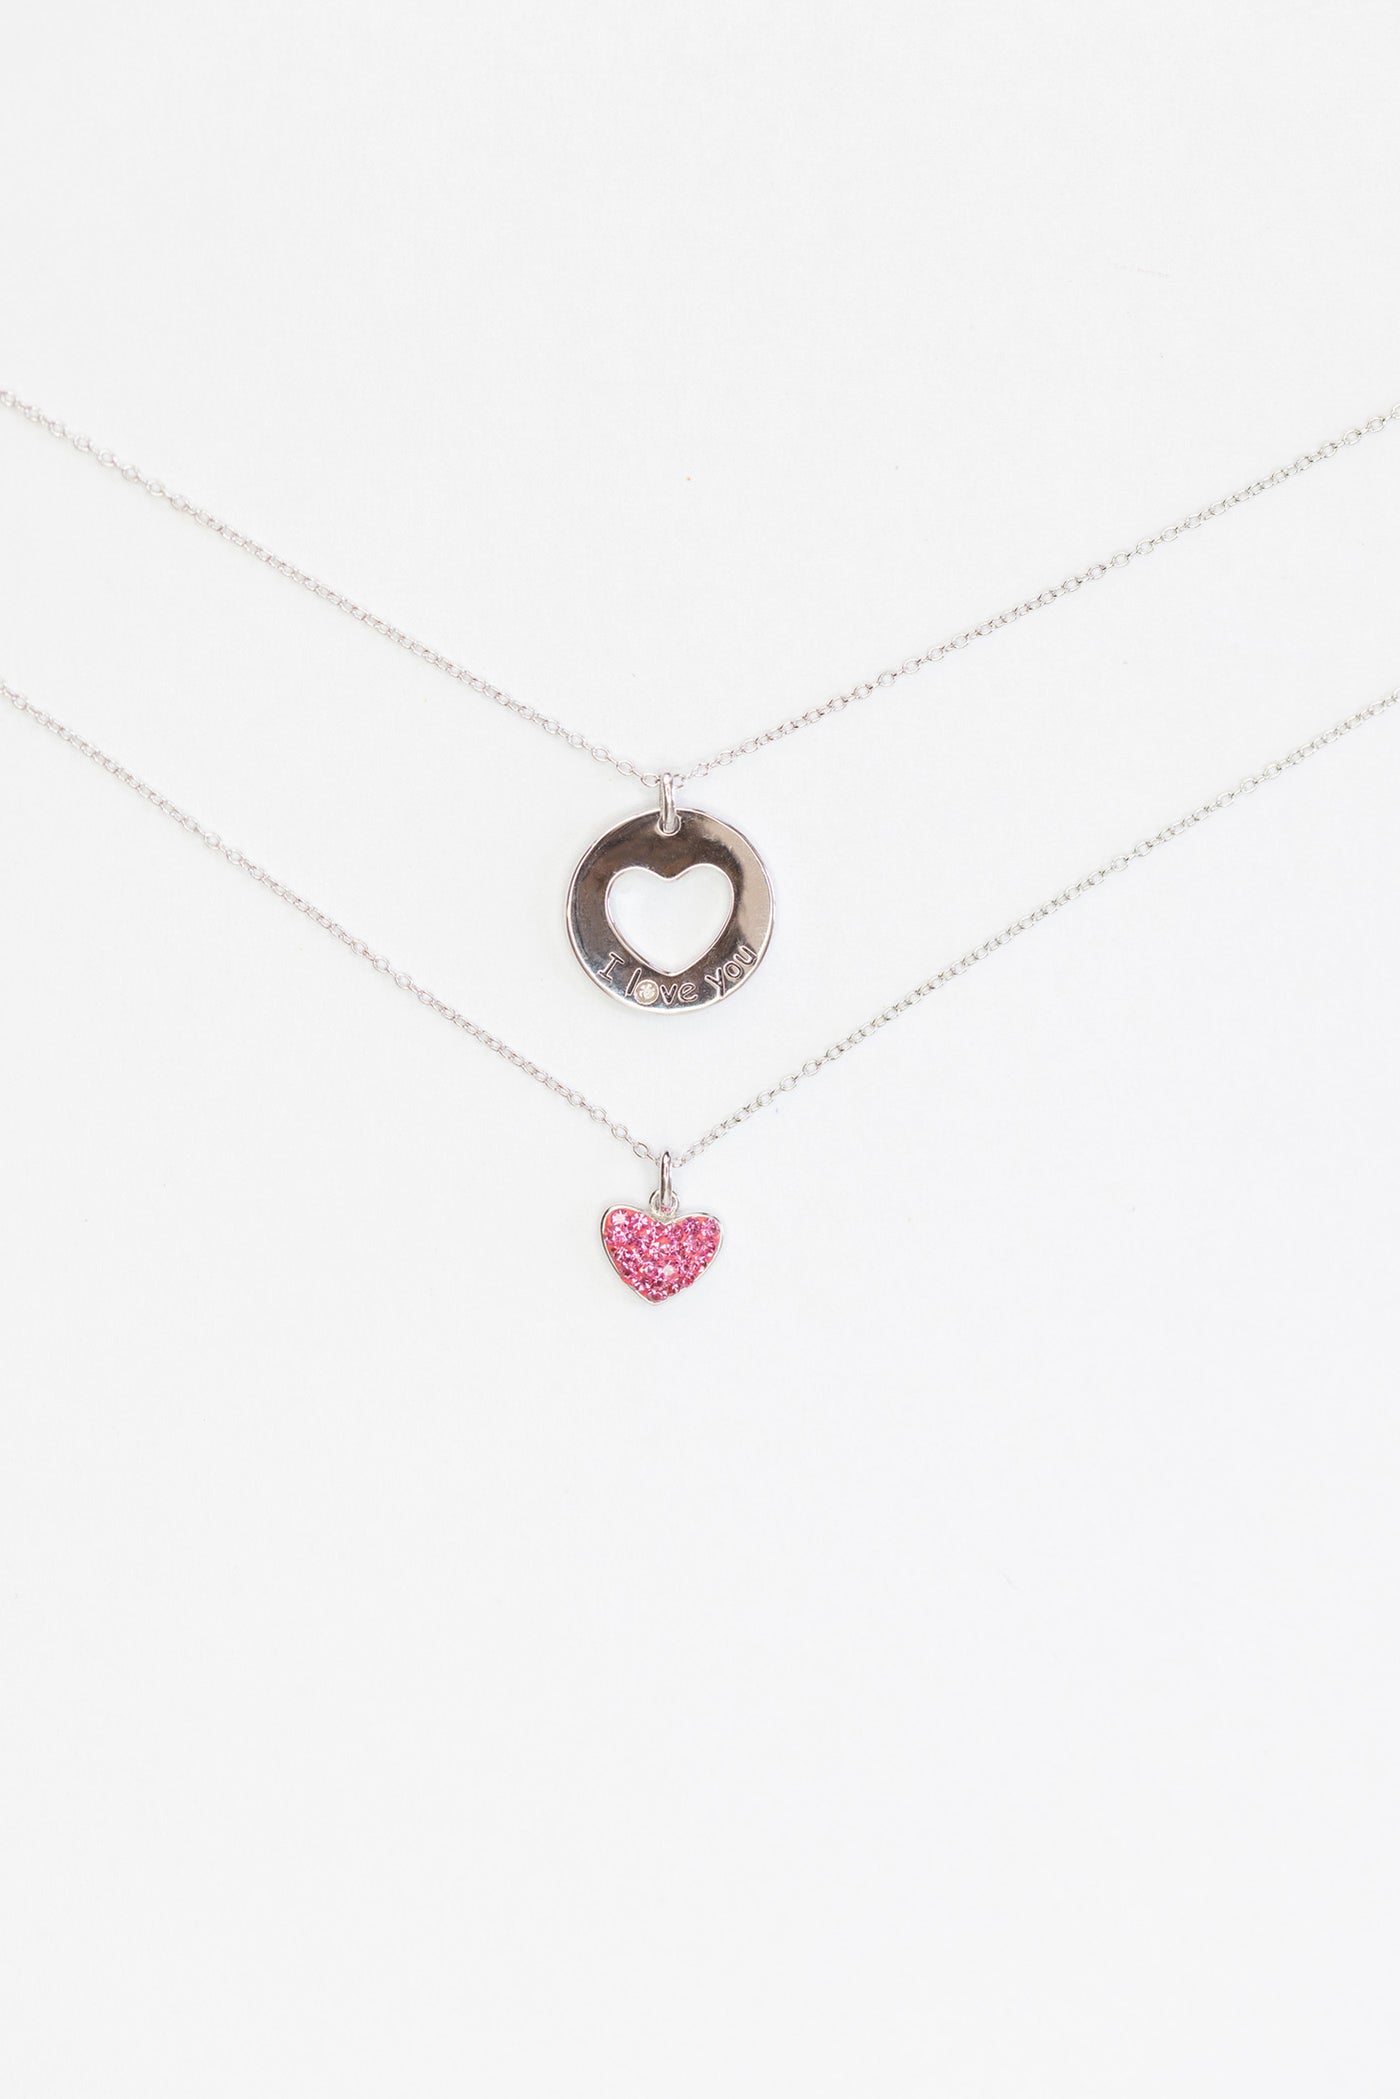 Mom and Daughter “I Love You” Rose Pink Heart Crystal Sterling Silver Necklace Set | Annie and Sisters